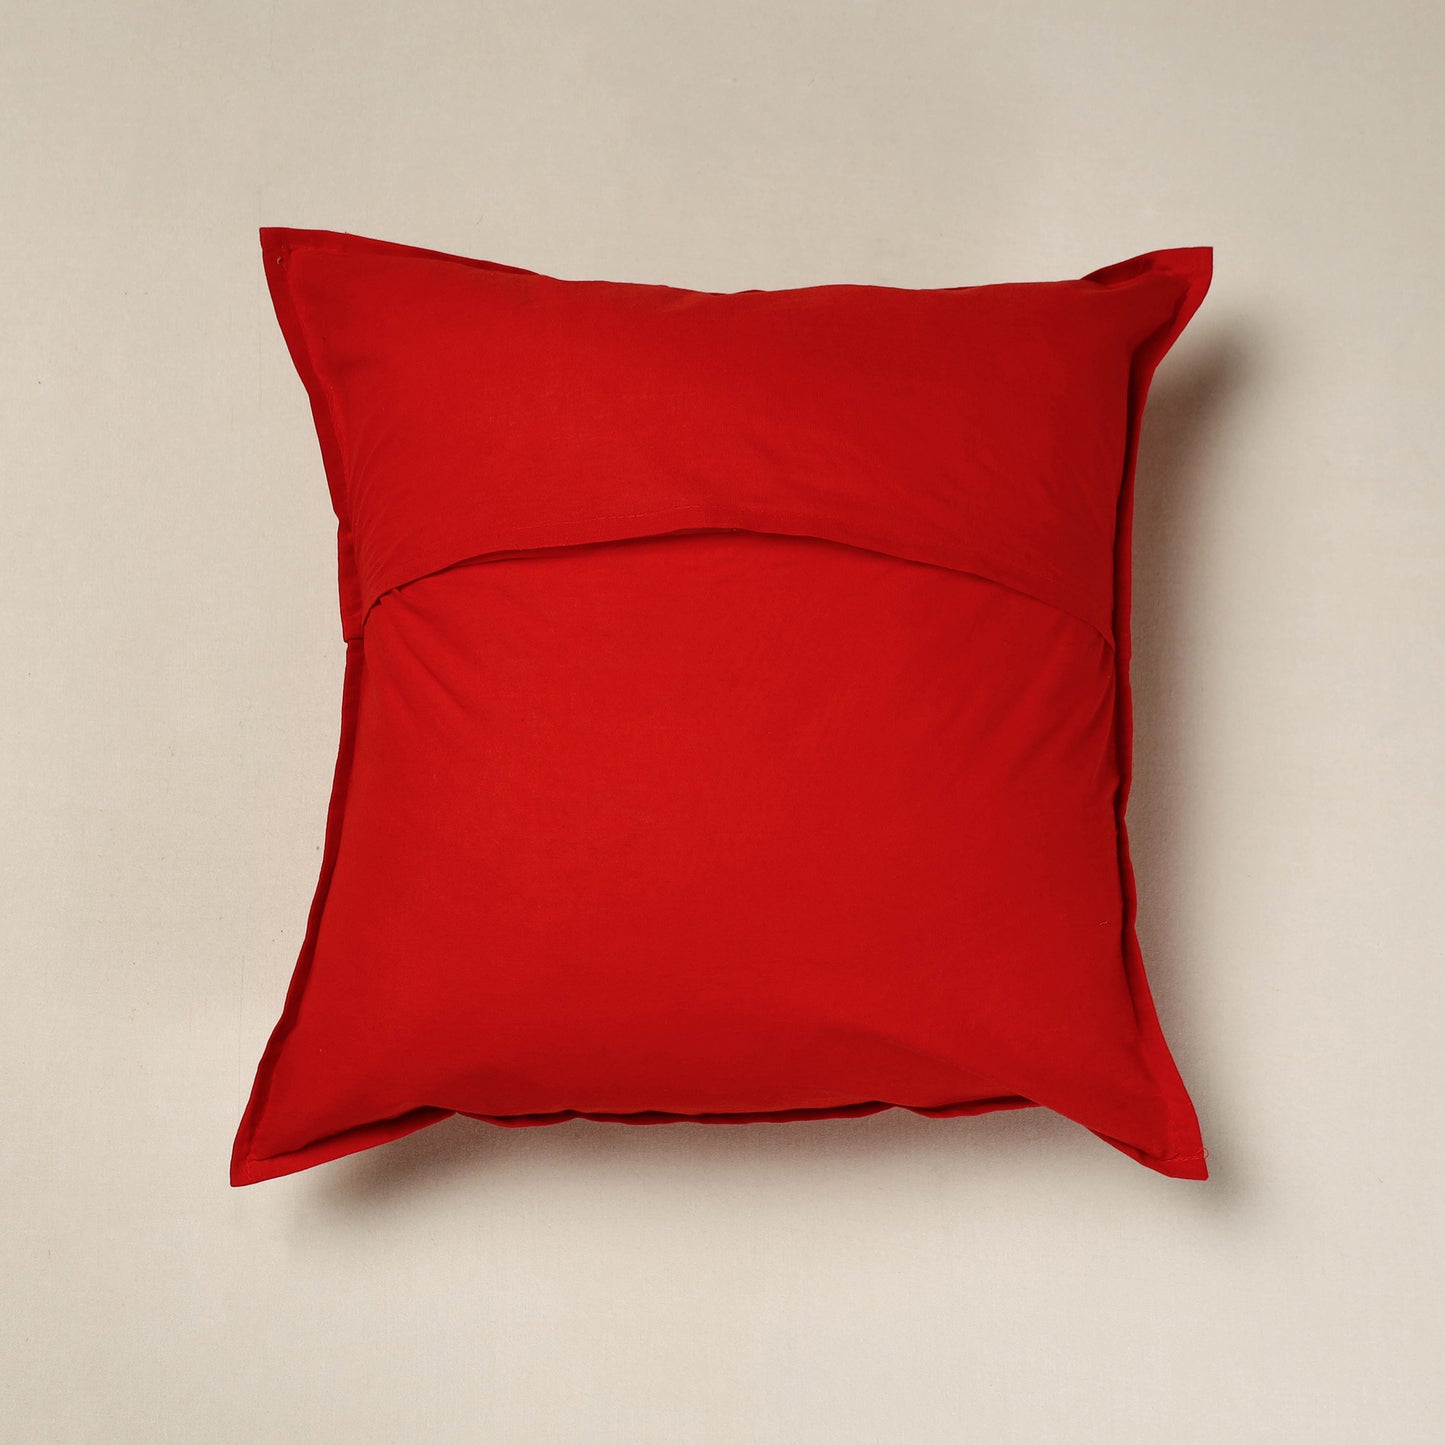 Red - Applique Cut Work Cotton Cushion Cover (16 x 16 in)